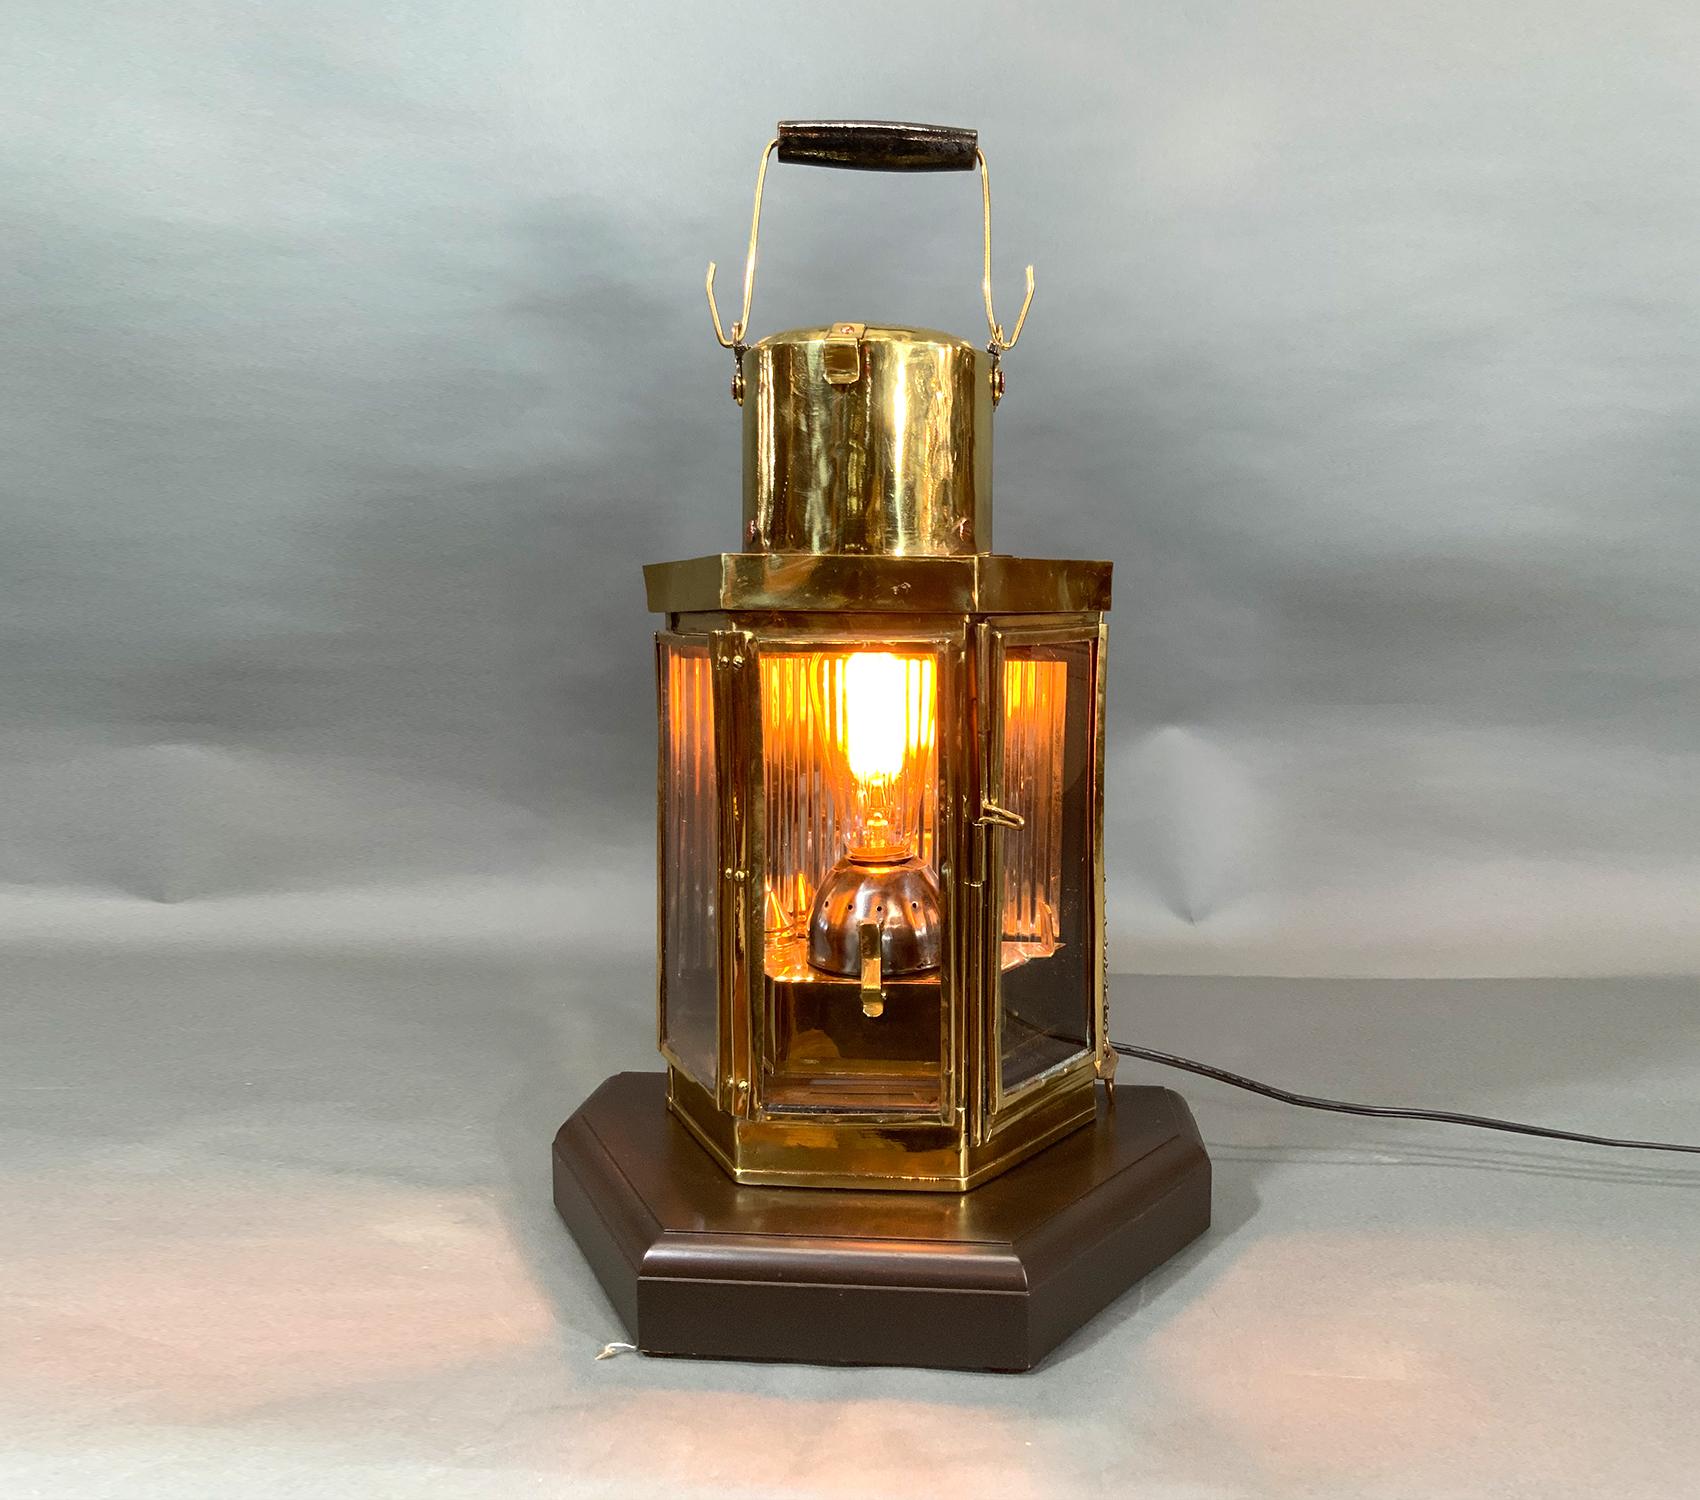 With three glass panels. Solid mahogany base. Wood handle. Electric socket with Edison bulb has been fitted to the original burner for home enjoyment.

Weight: 12 LBS
Overall Dimensions: 17